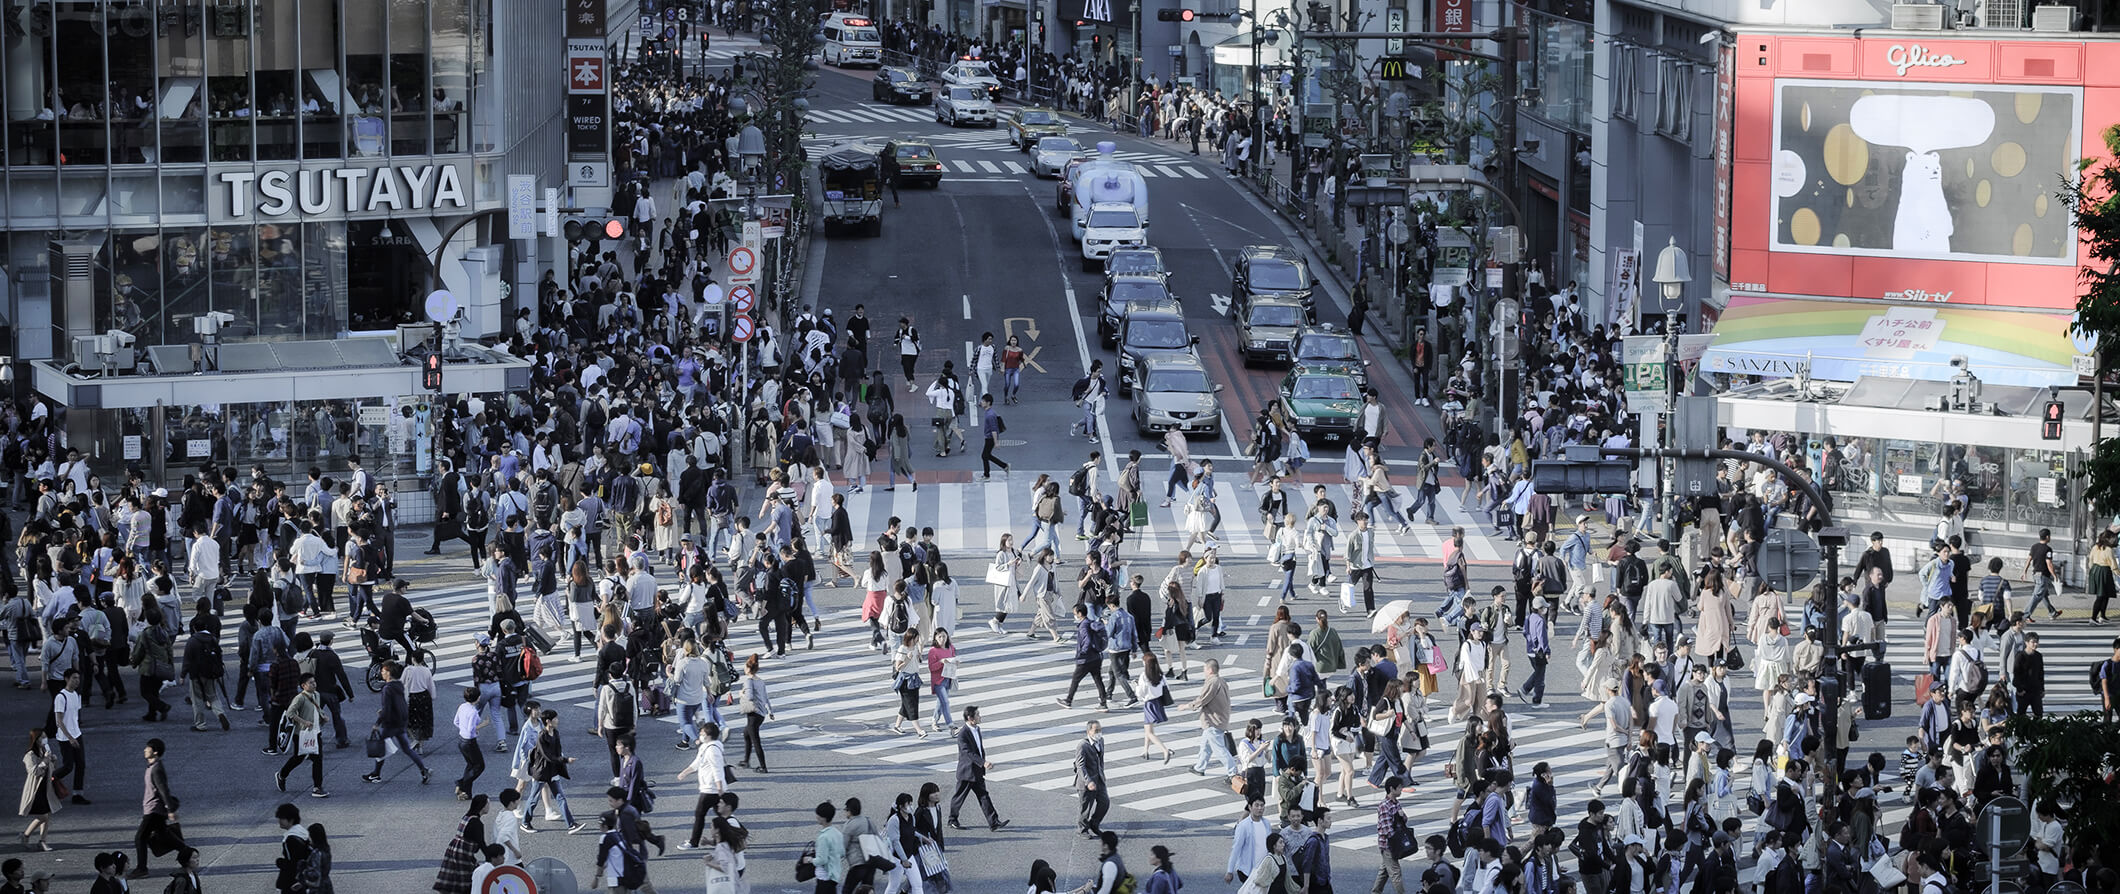 People walking on a busy intersection in Tokyo